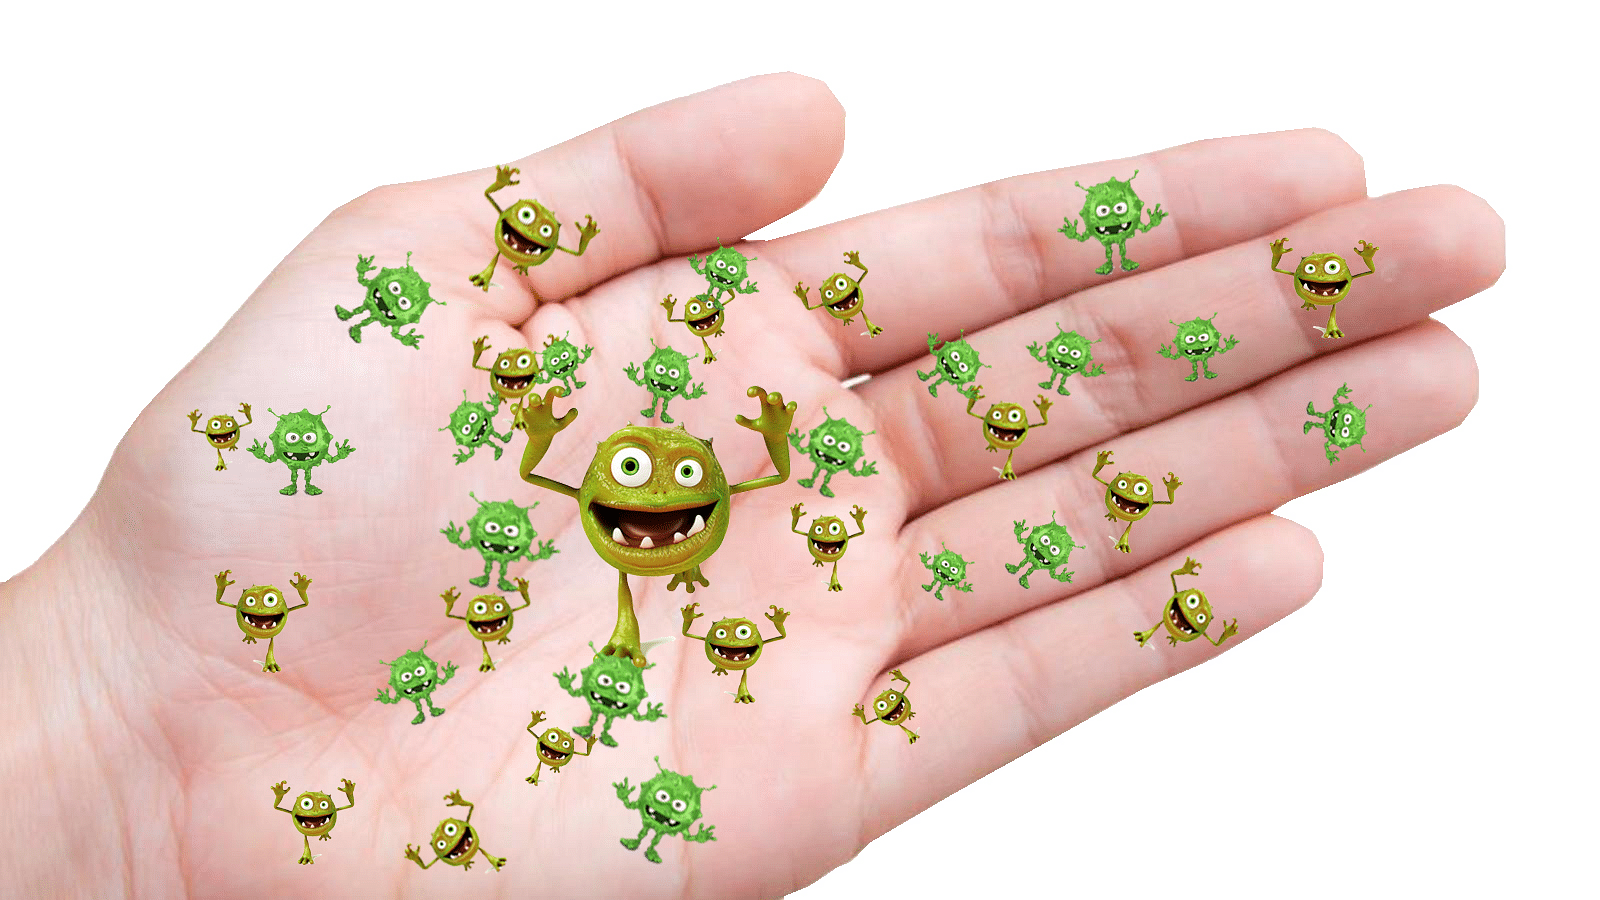 There is a plethora of invisible germs and bacteria on every surface your hands touch. 